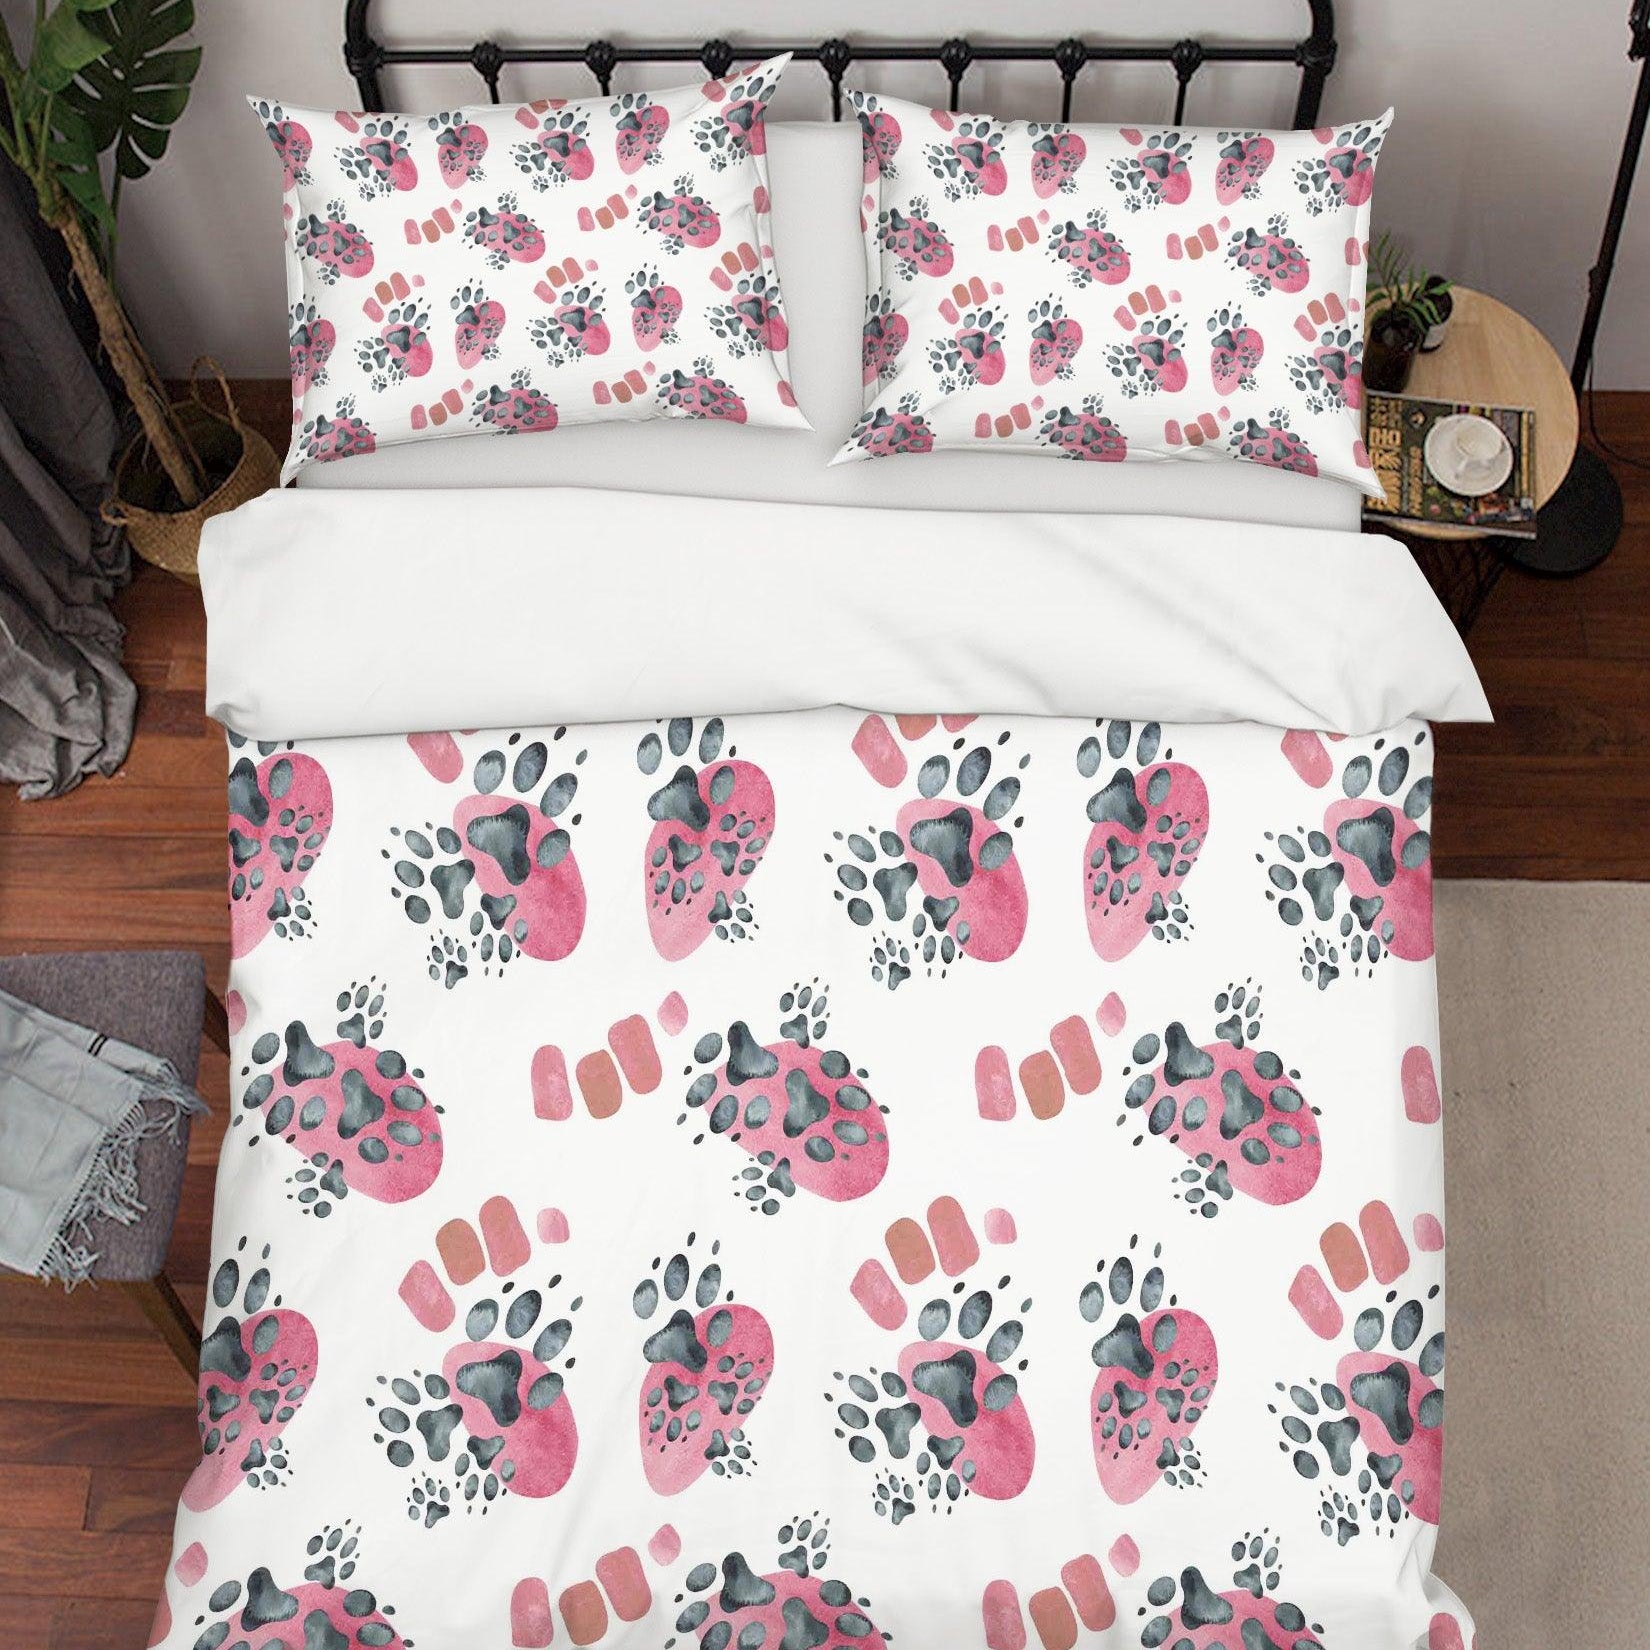 3D Abstract Animal Paw Pattern Quilt Cover Set Bedding Set Duvet Cover Pillowcases LXL- Jess Art Decoration